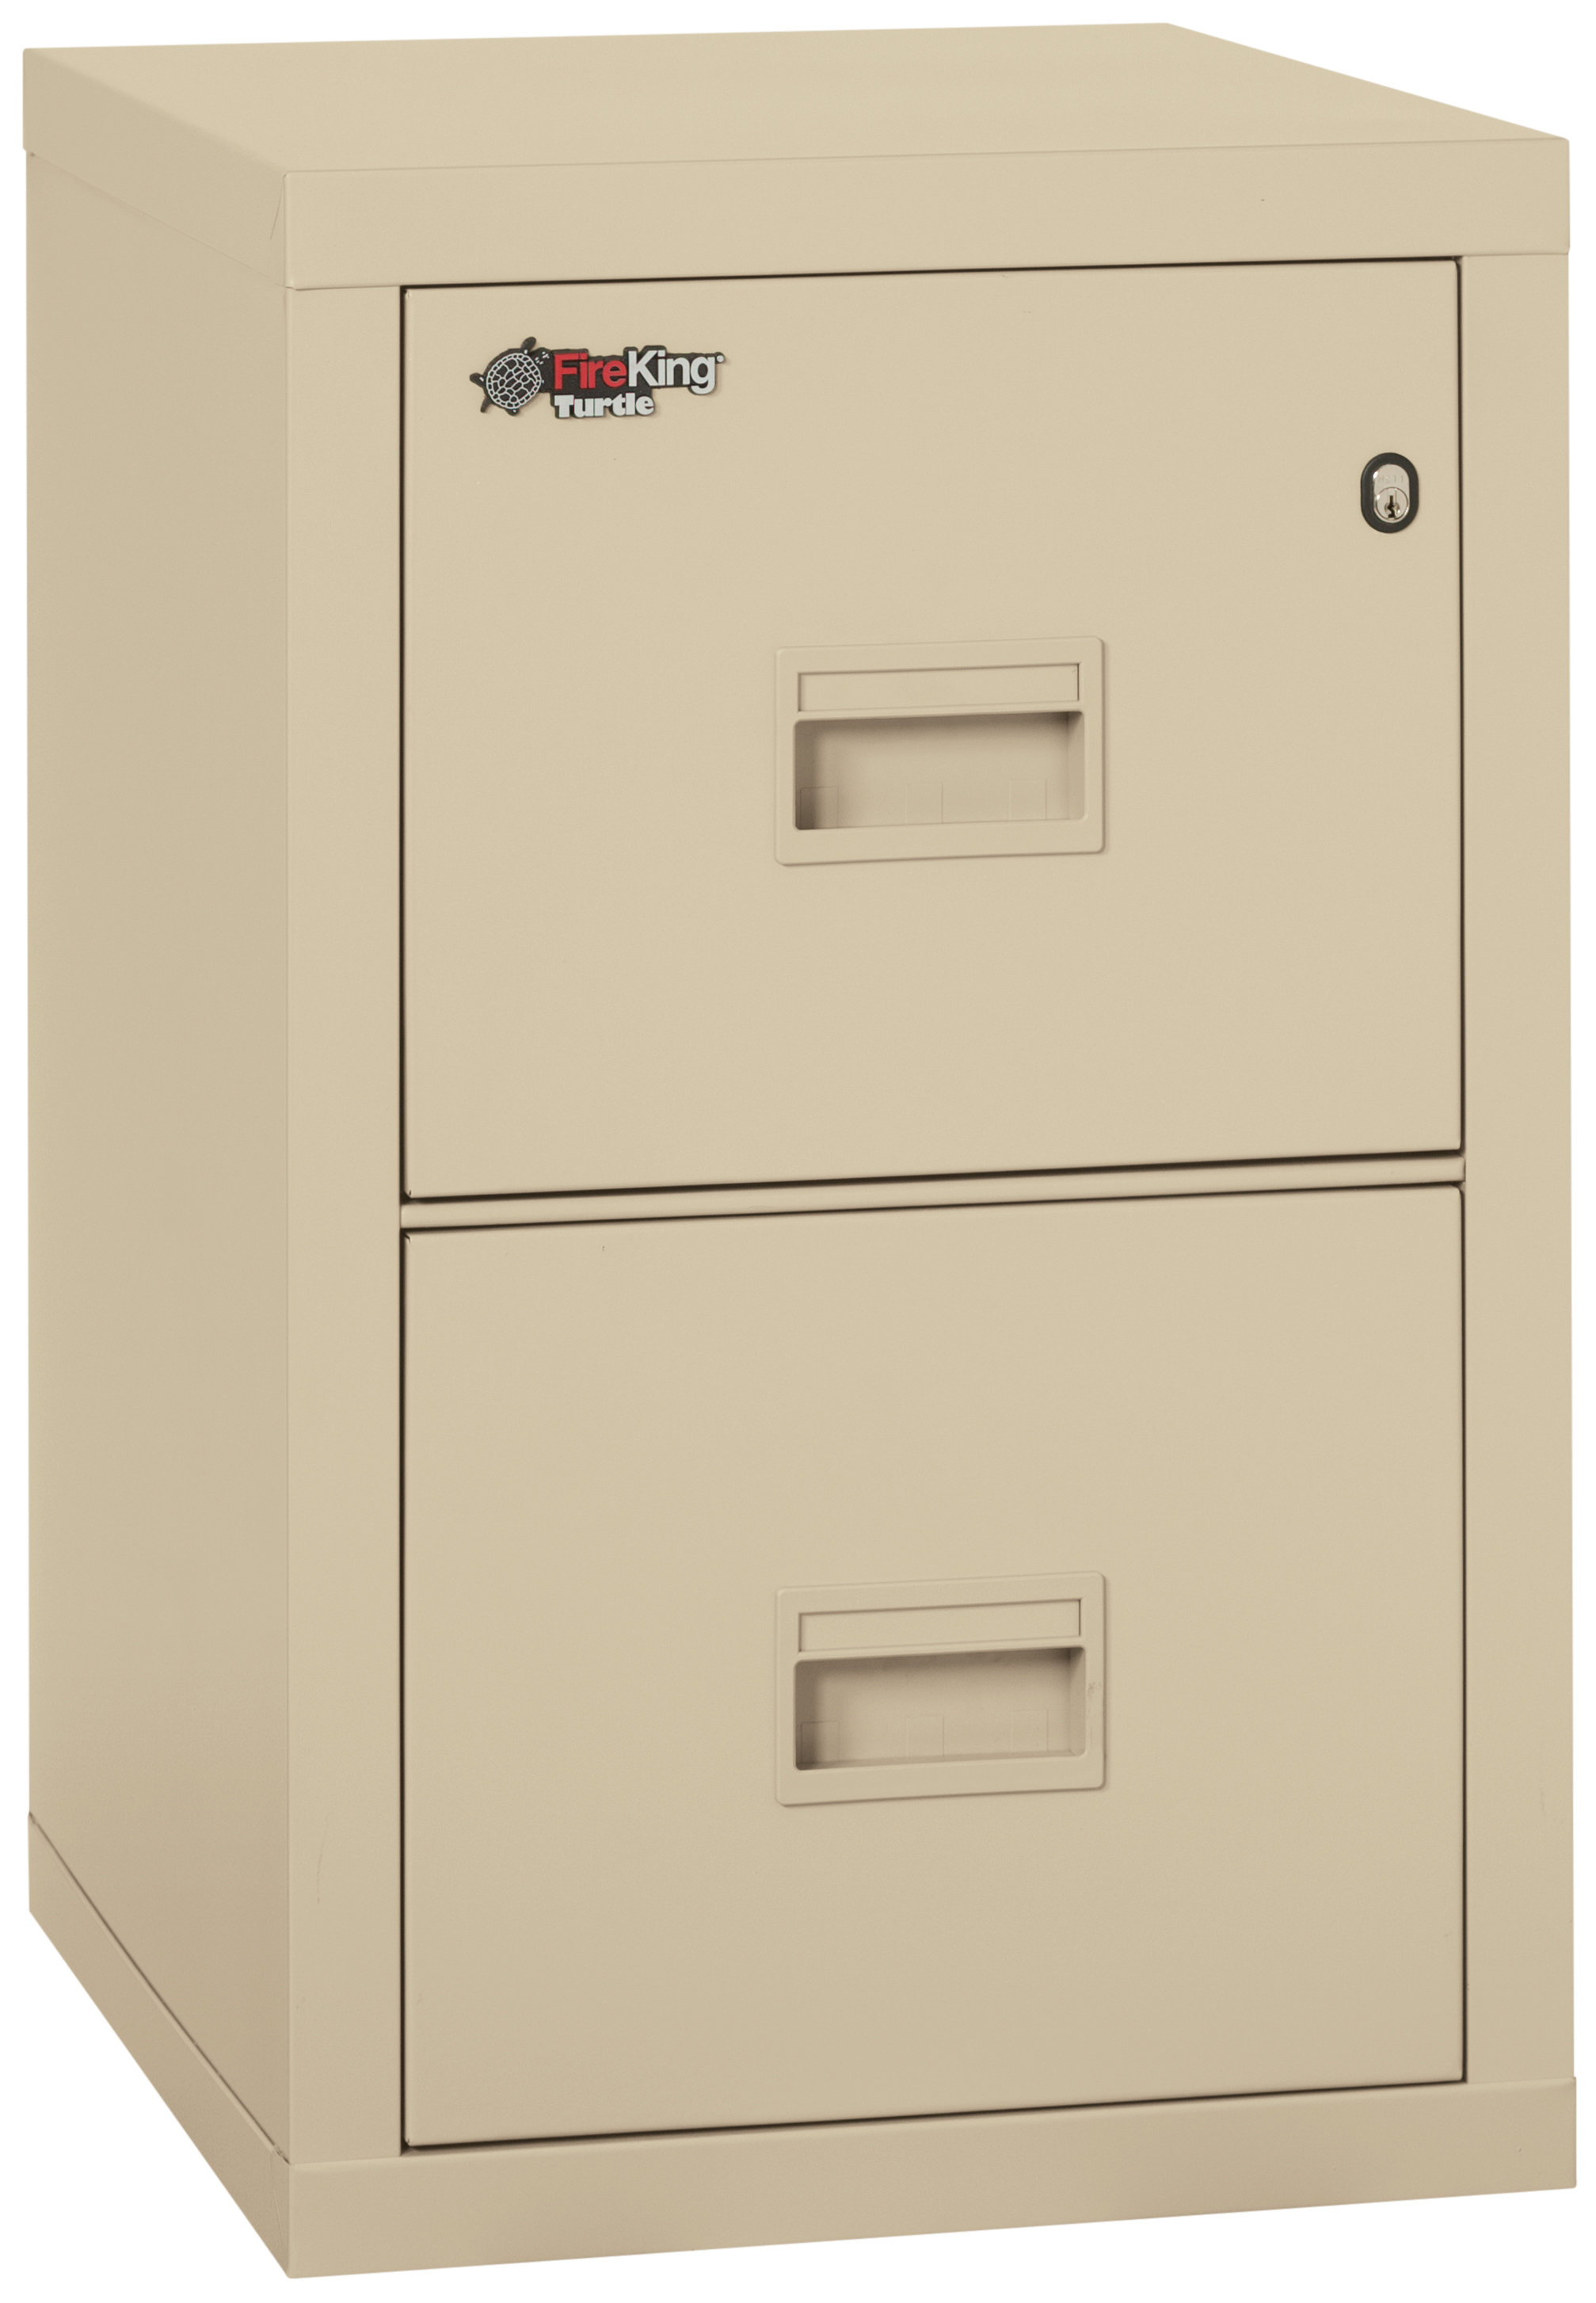 Turtle Fireproof 2 Drawer Vertical File Cabinet in dimensions 2015 X 2907